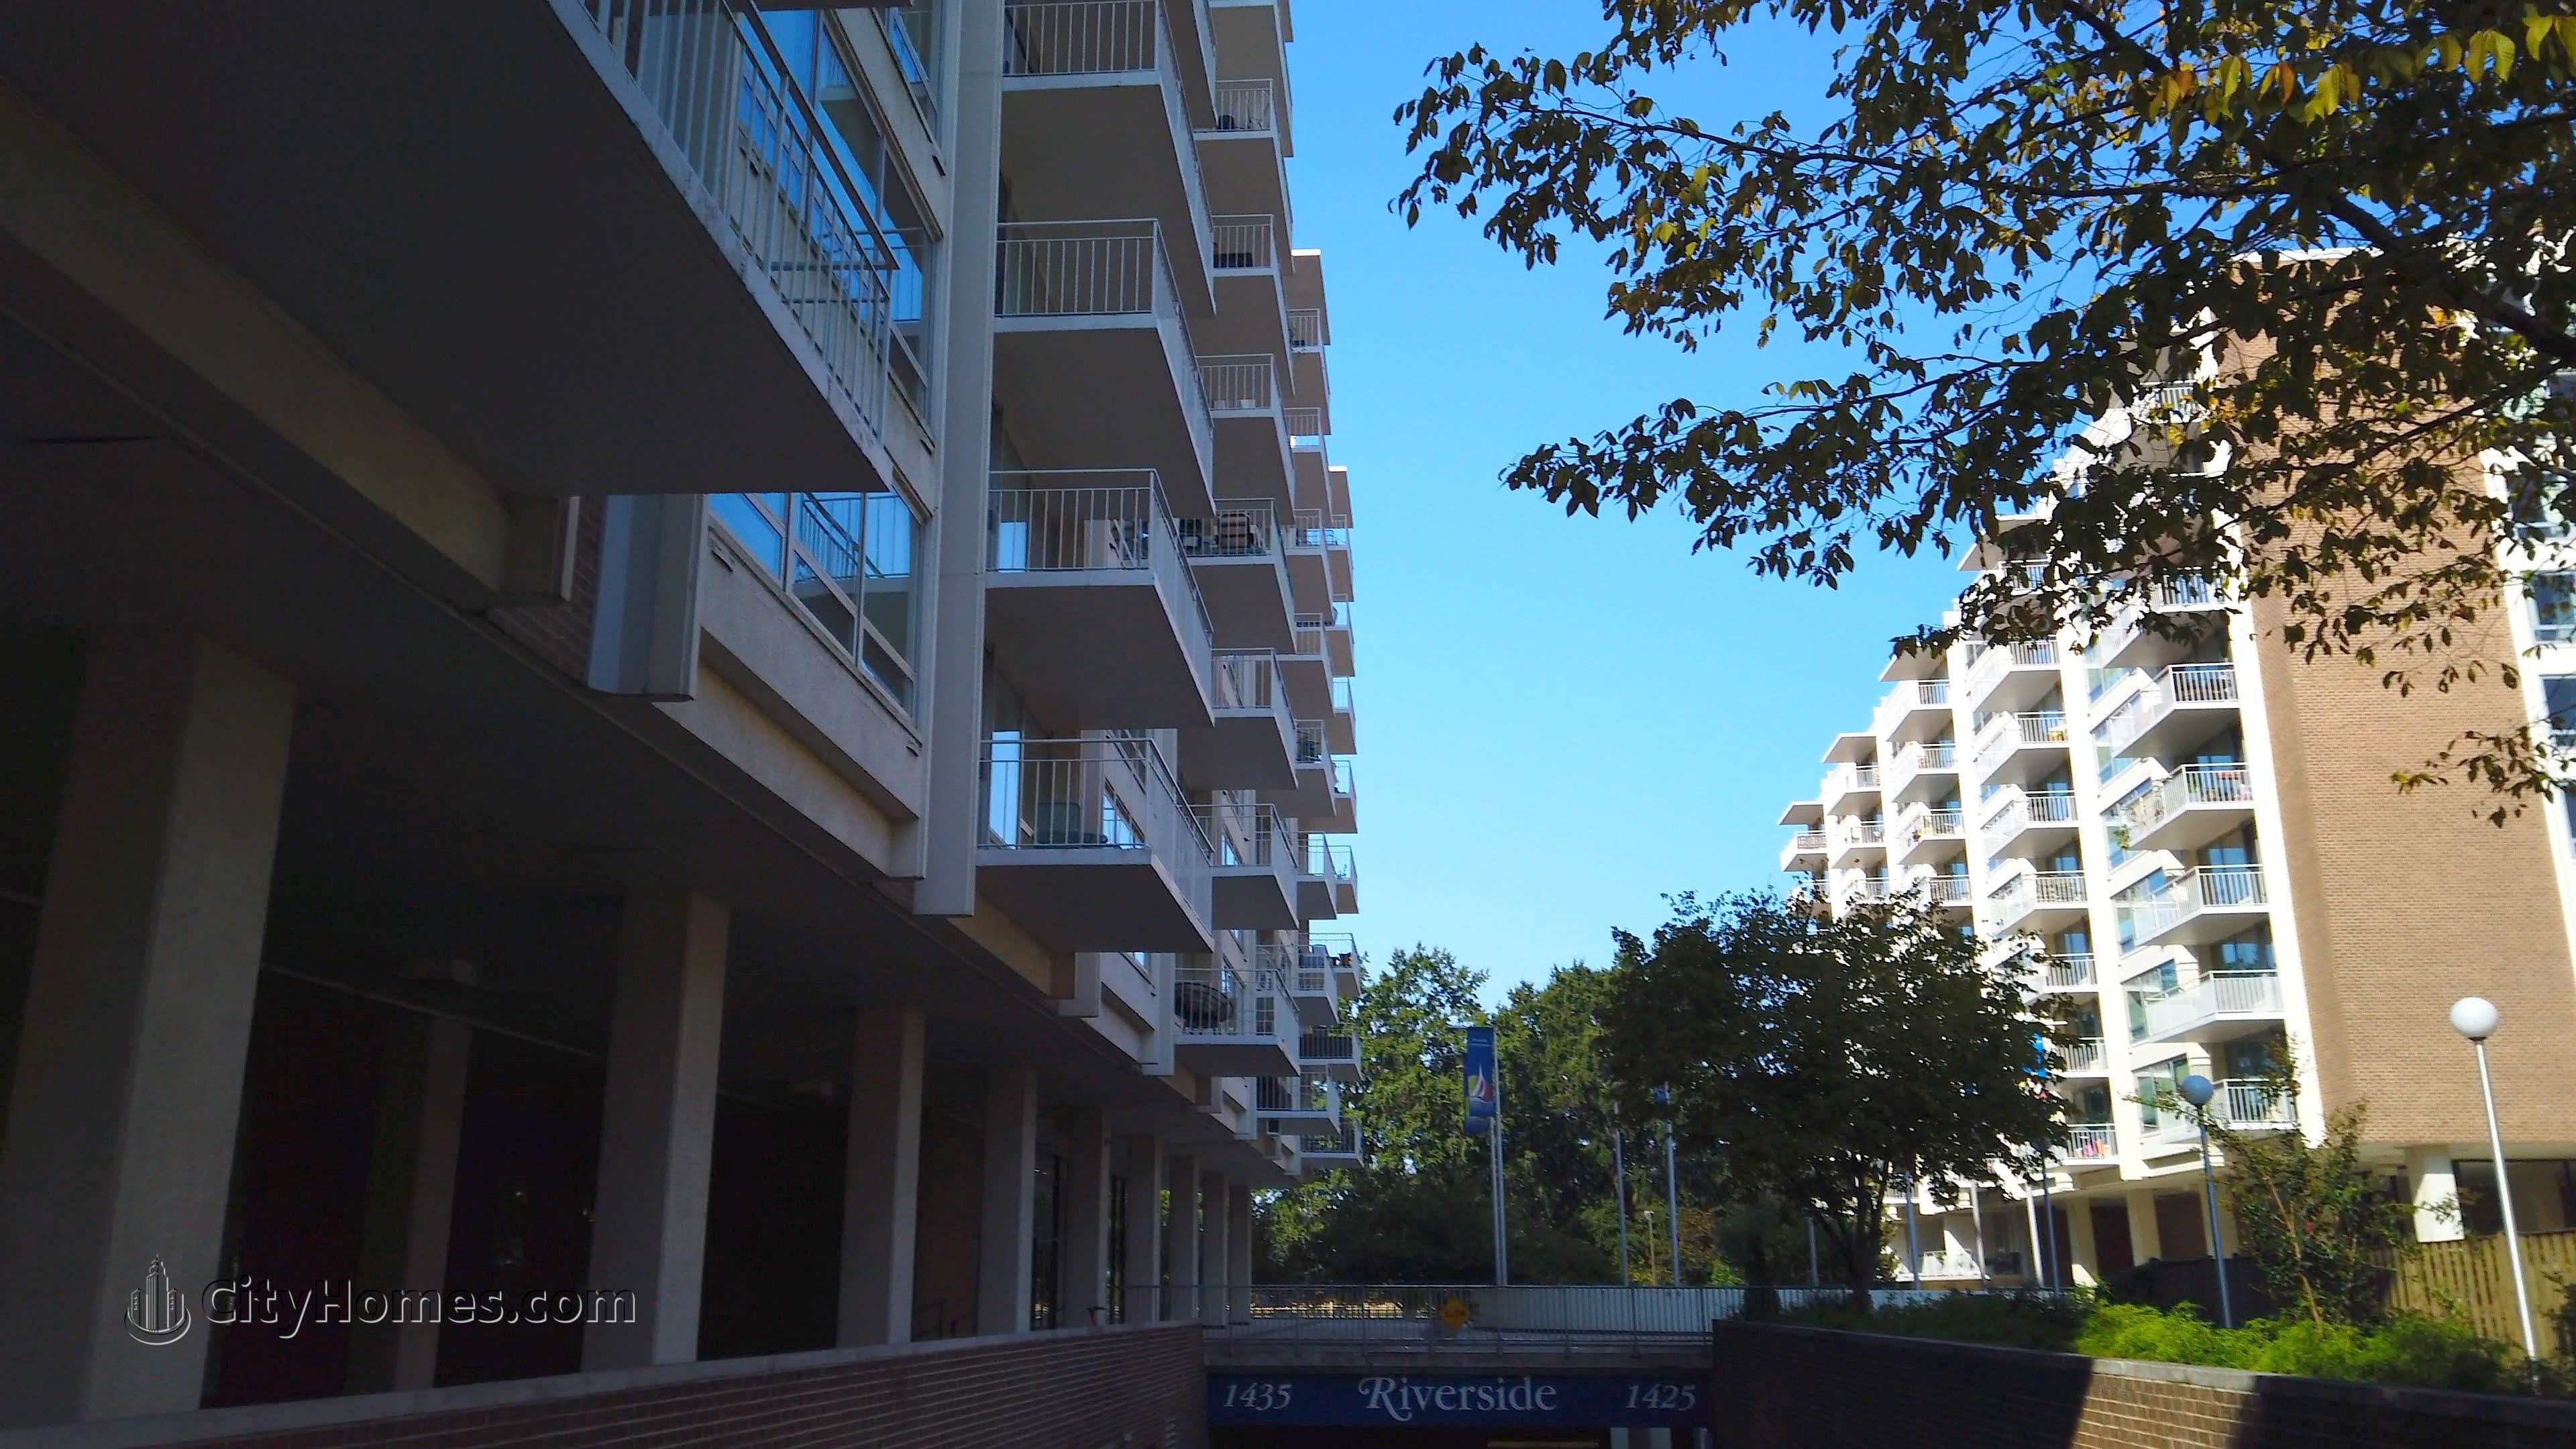 8. Riverside Condominiums xây dựng tại 1425 & 1435 4th St NW, Southwest / Waterfront, Washington, DC 20024